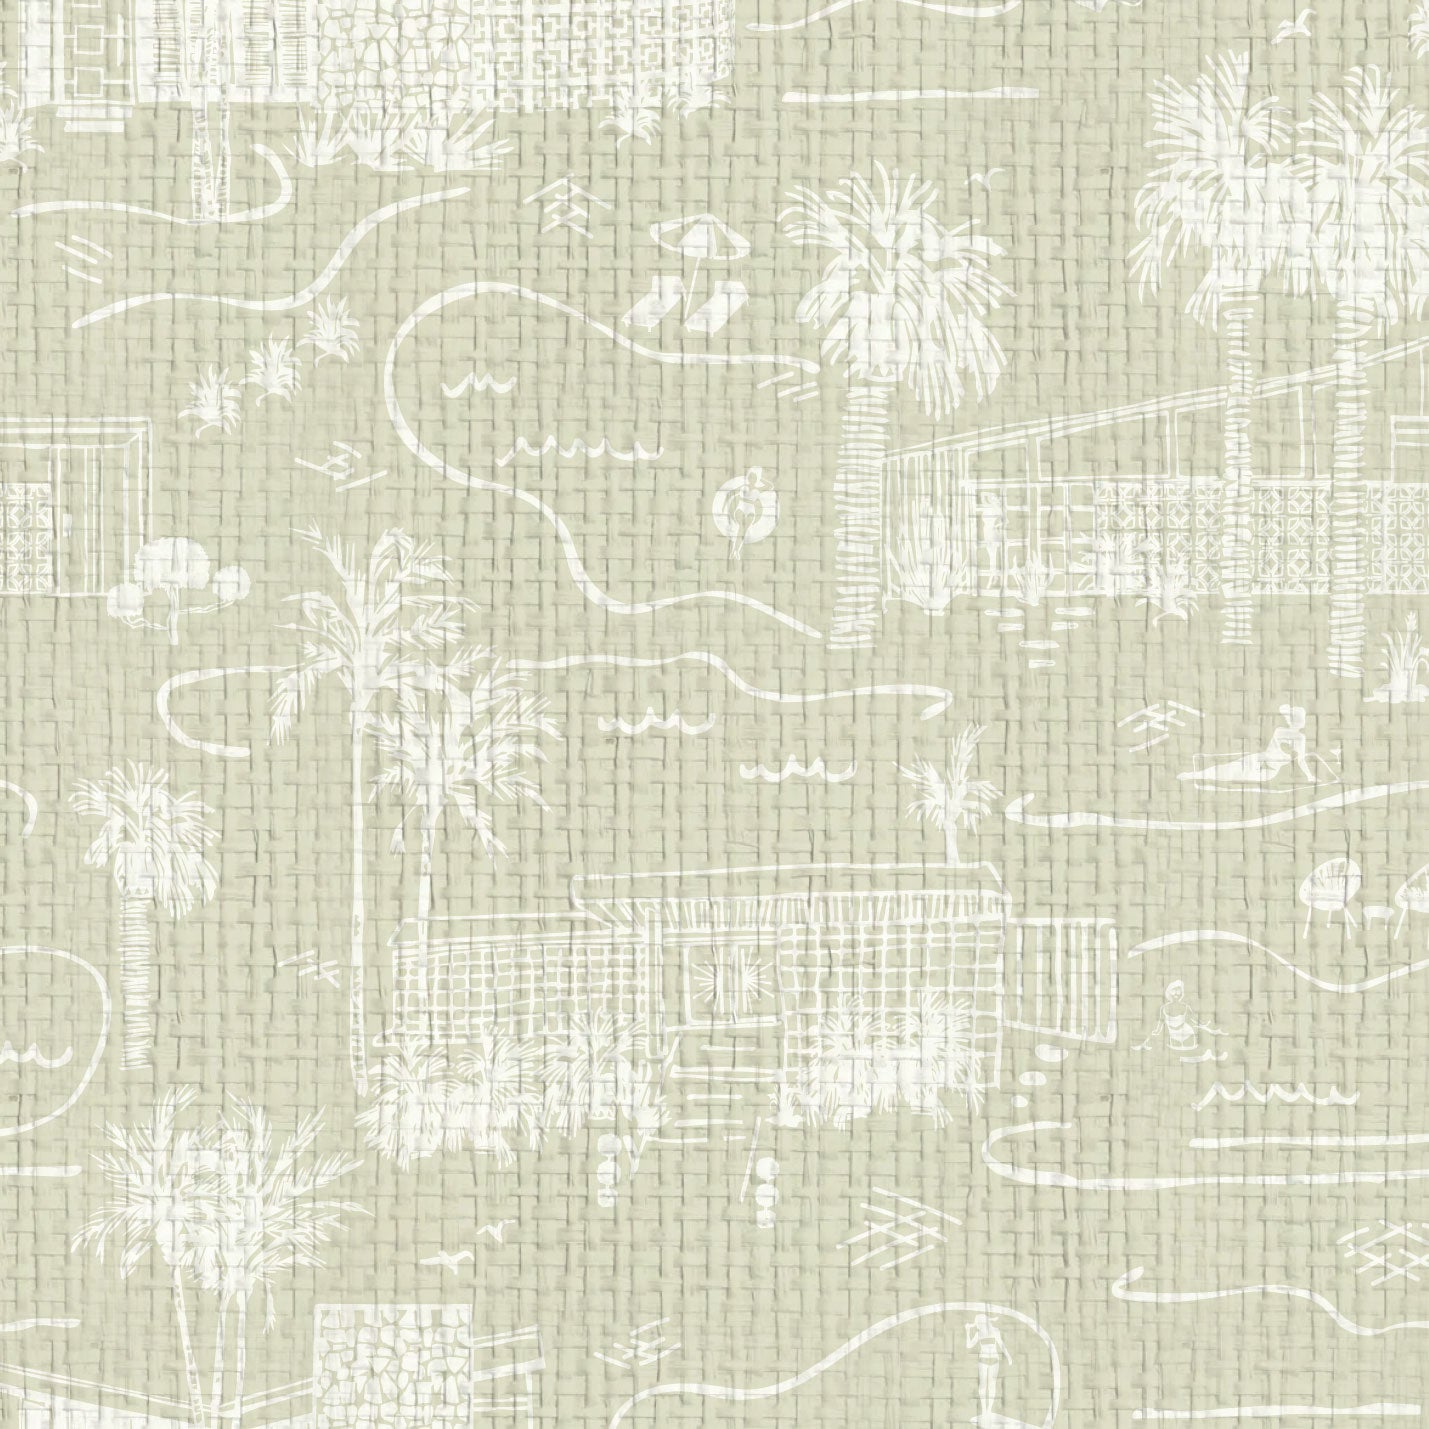 wallpaper Natural Textured Eco-Friendly Non-toxic High-quality Sustainable Interior Design Bold Custom Tailor-made Retro chic Bold tropical garden palm tree vintage coastal toile Grasscloth wallpaper Natural Textured Eco-Friendly Non-toxic High-quality Sustainable Interior Design Bold Custom Tailor-made Retro chic Bold Toile de Jouy palm springs desert mid-century palm trees pool naked lady hand-drawn tan sand off-white cream neutral tonal white paperweave paper weave